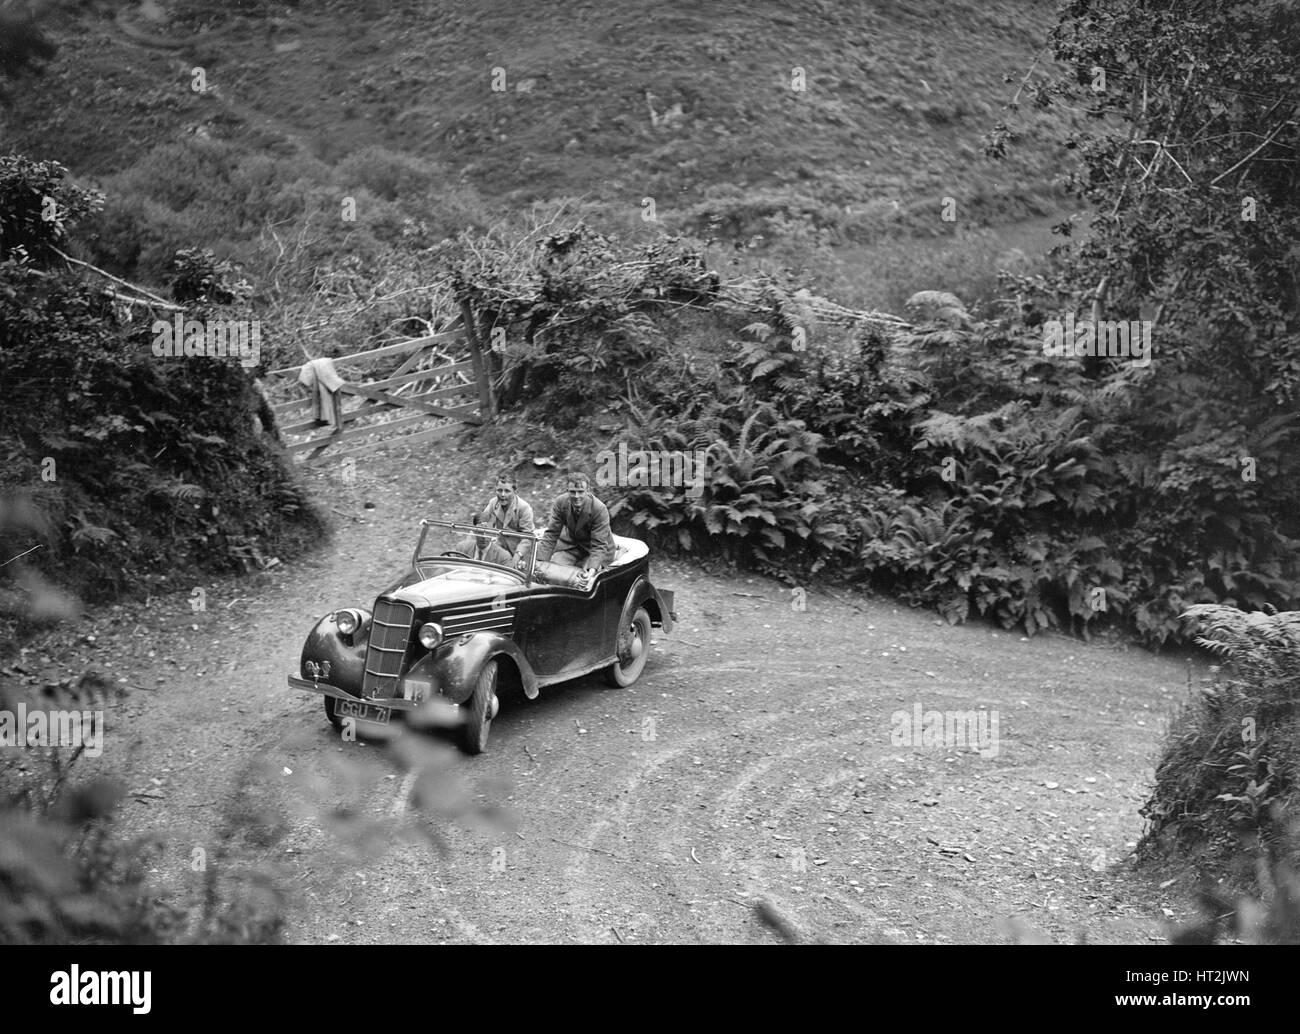 1935 Ford Ten tourer taking part in a motoring trial, late 1930s. Artist: Bill Brunell. Stock Photo